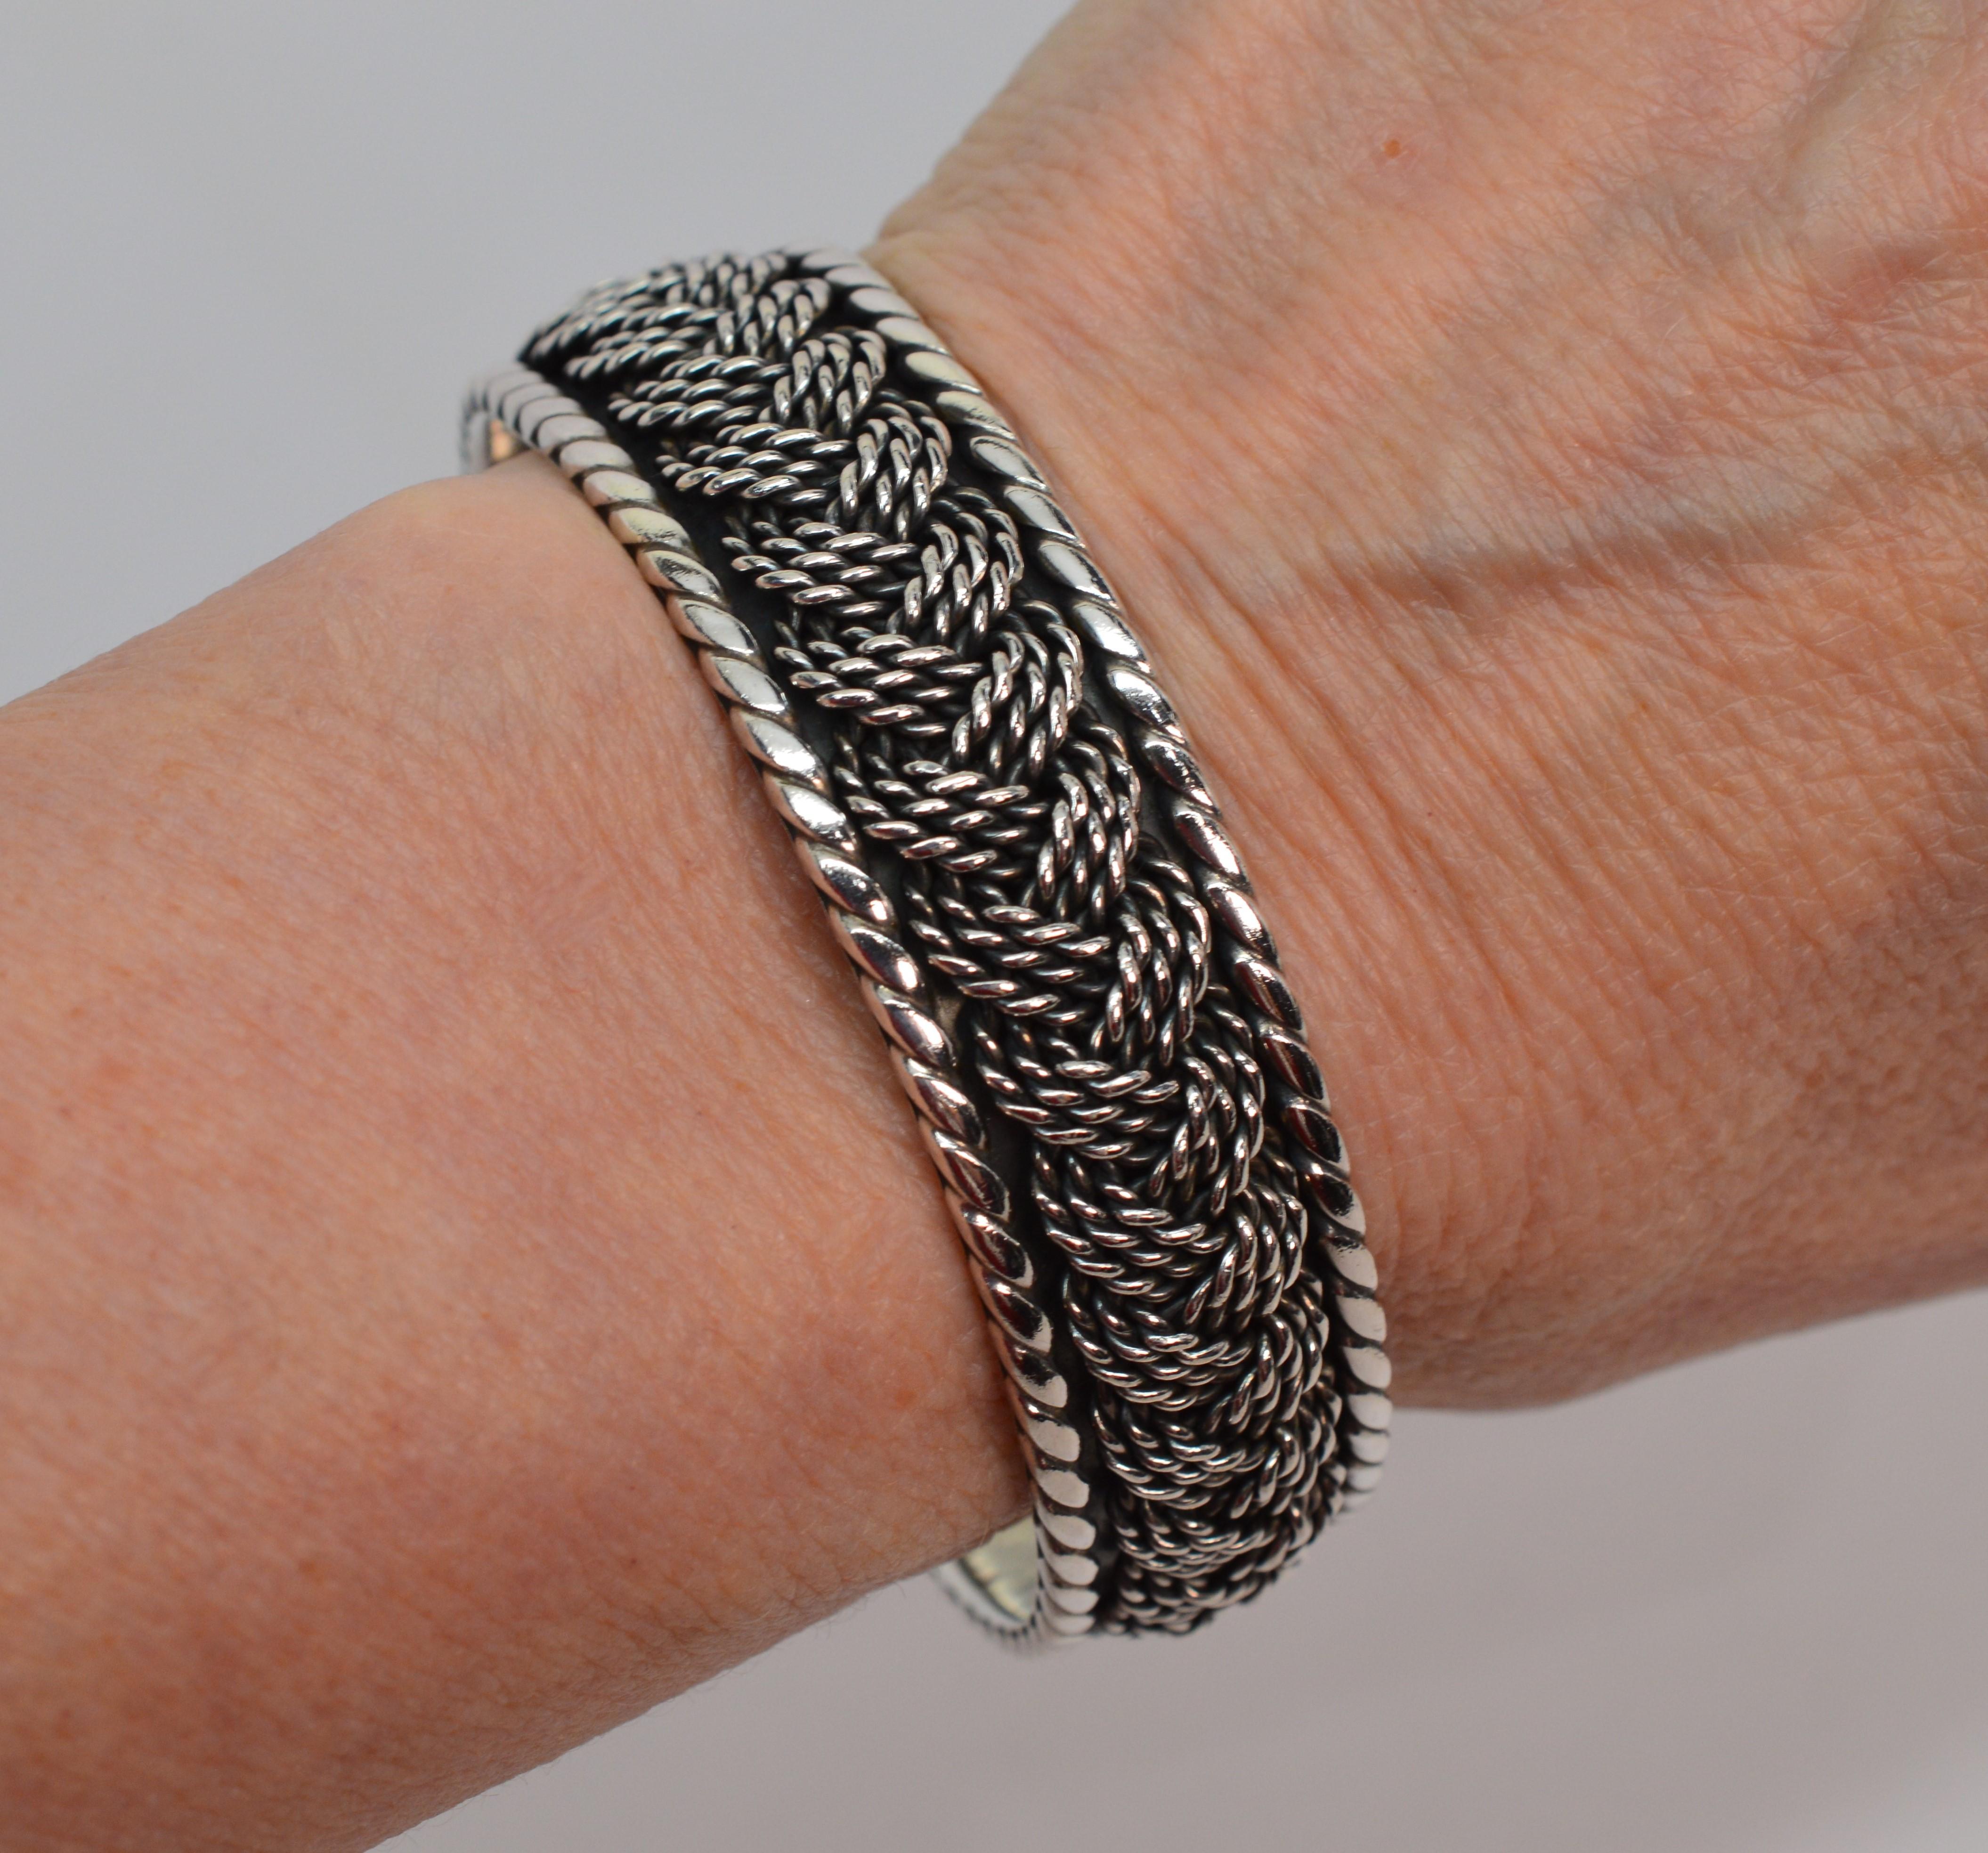 Abundant textures and dimension work in harmony on this substantial sterling silver bangle. The wholesome artisan quality, crafted in Mexico, make this bracelet notably outstanding. 
Measuring 3/4 inch wide and the bangle displays an attractive